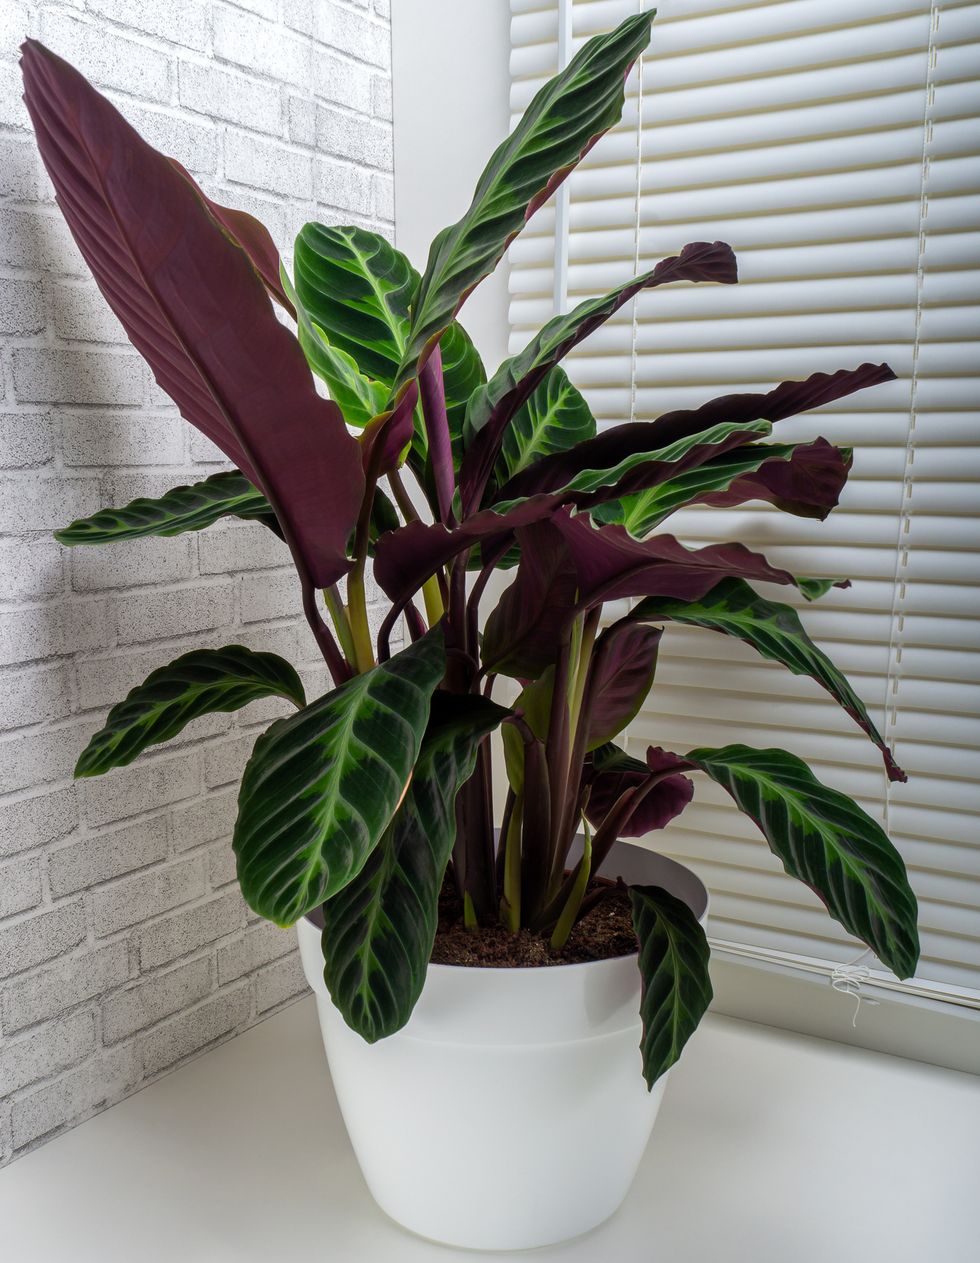 calathea plant, calathea warscewiczii is a species of evergreen, perennial, herbaceous plant in the marantaceae family